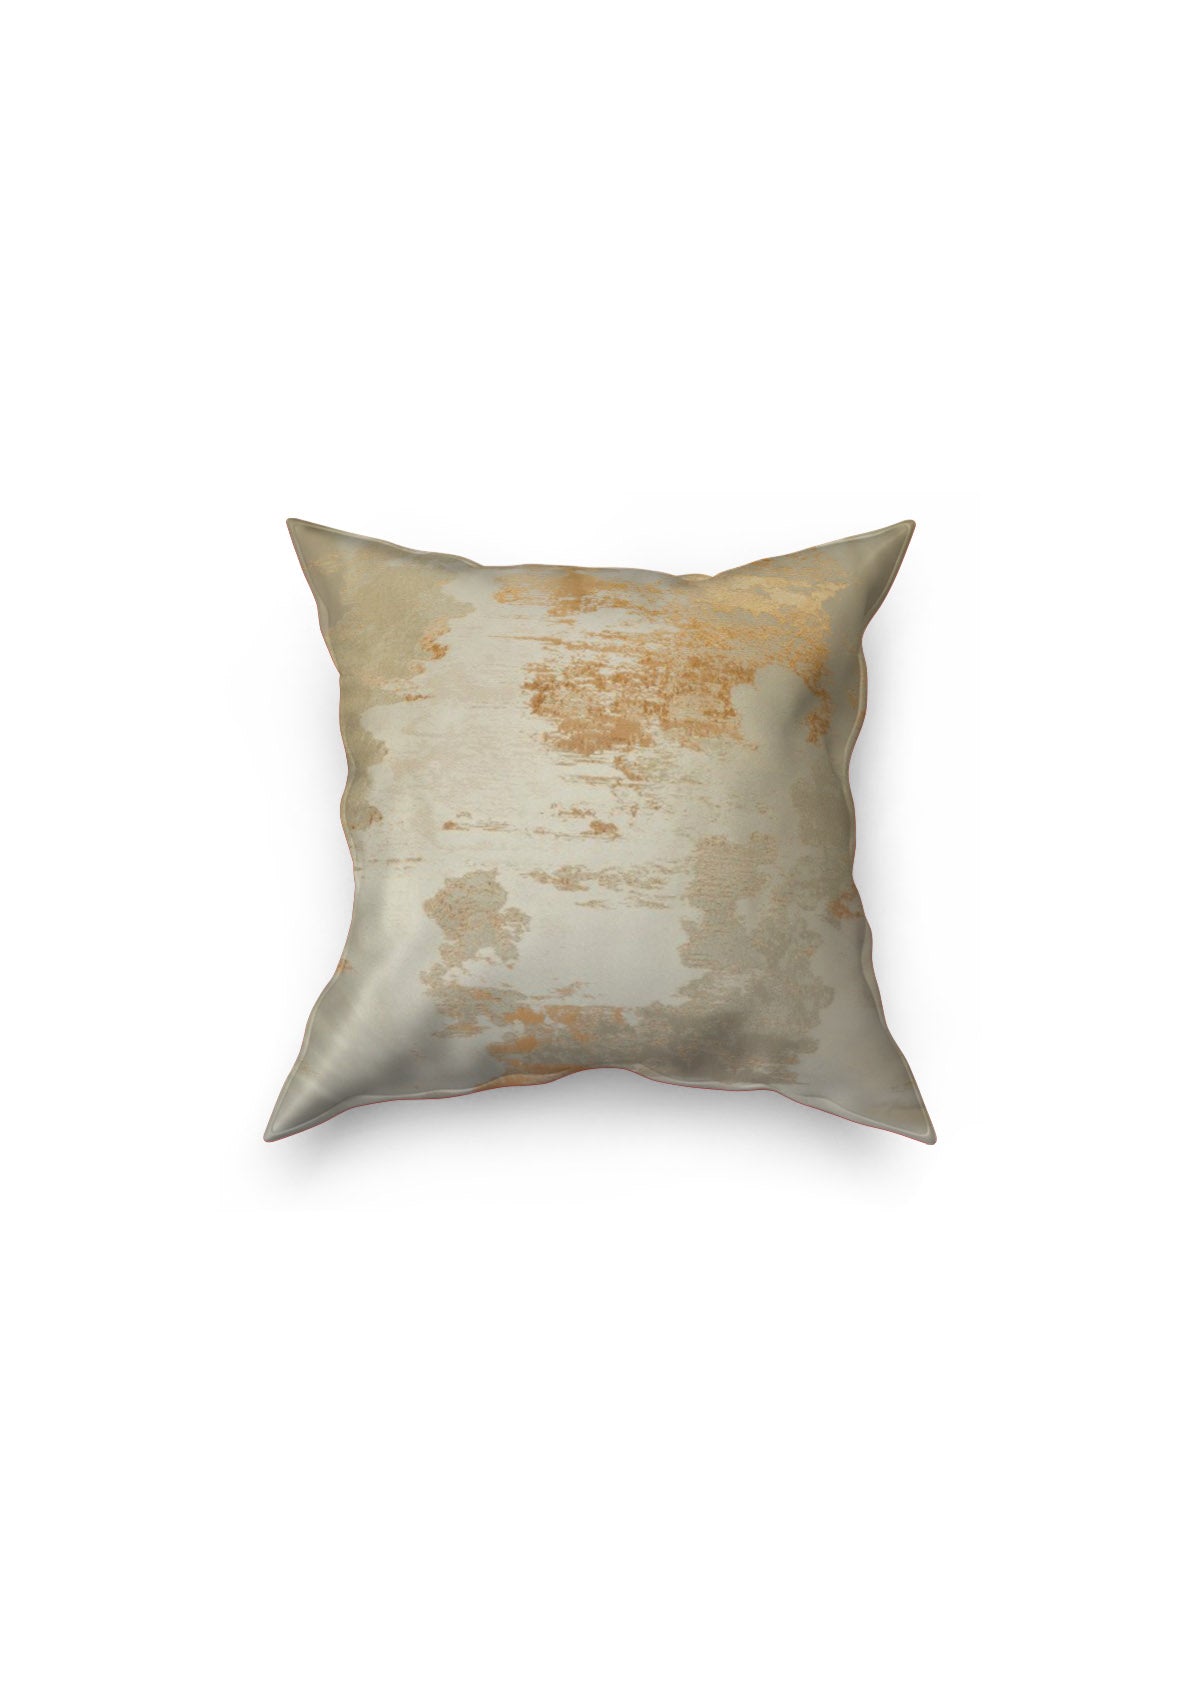 Antique Gold Cushion Covers | CovermyCushion